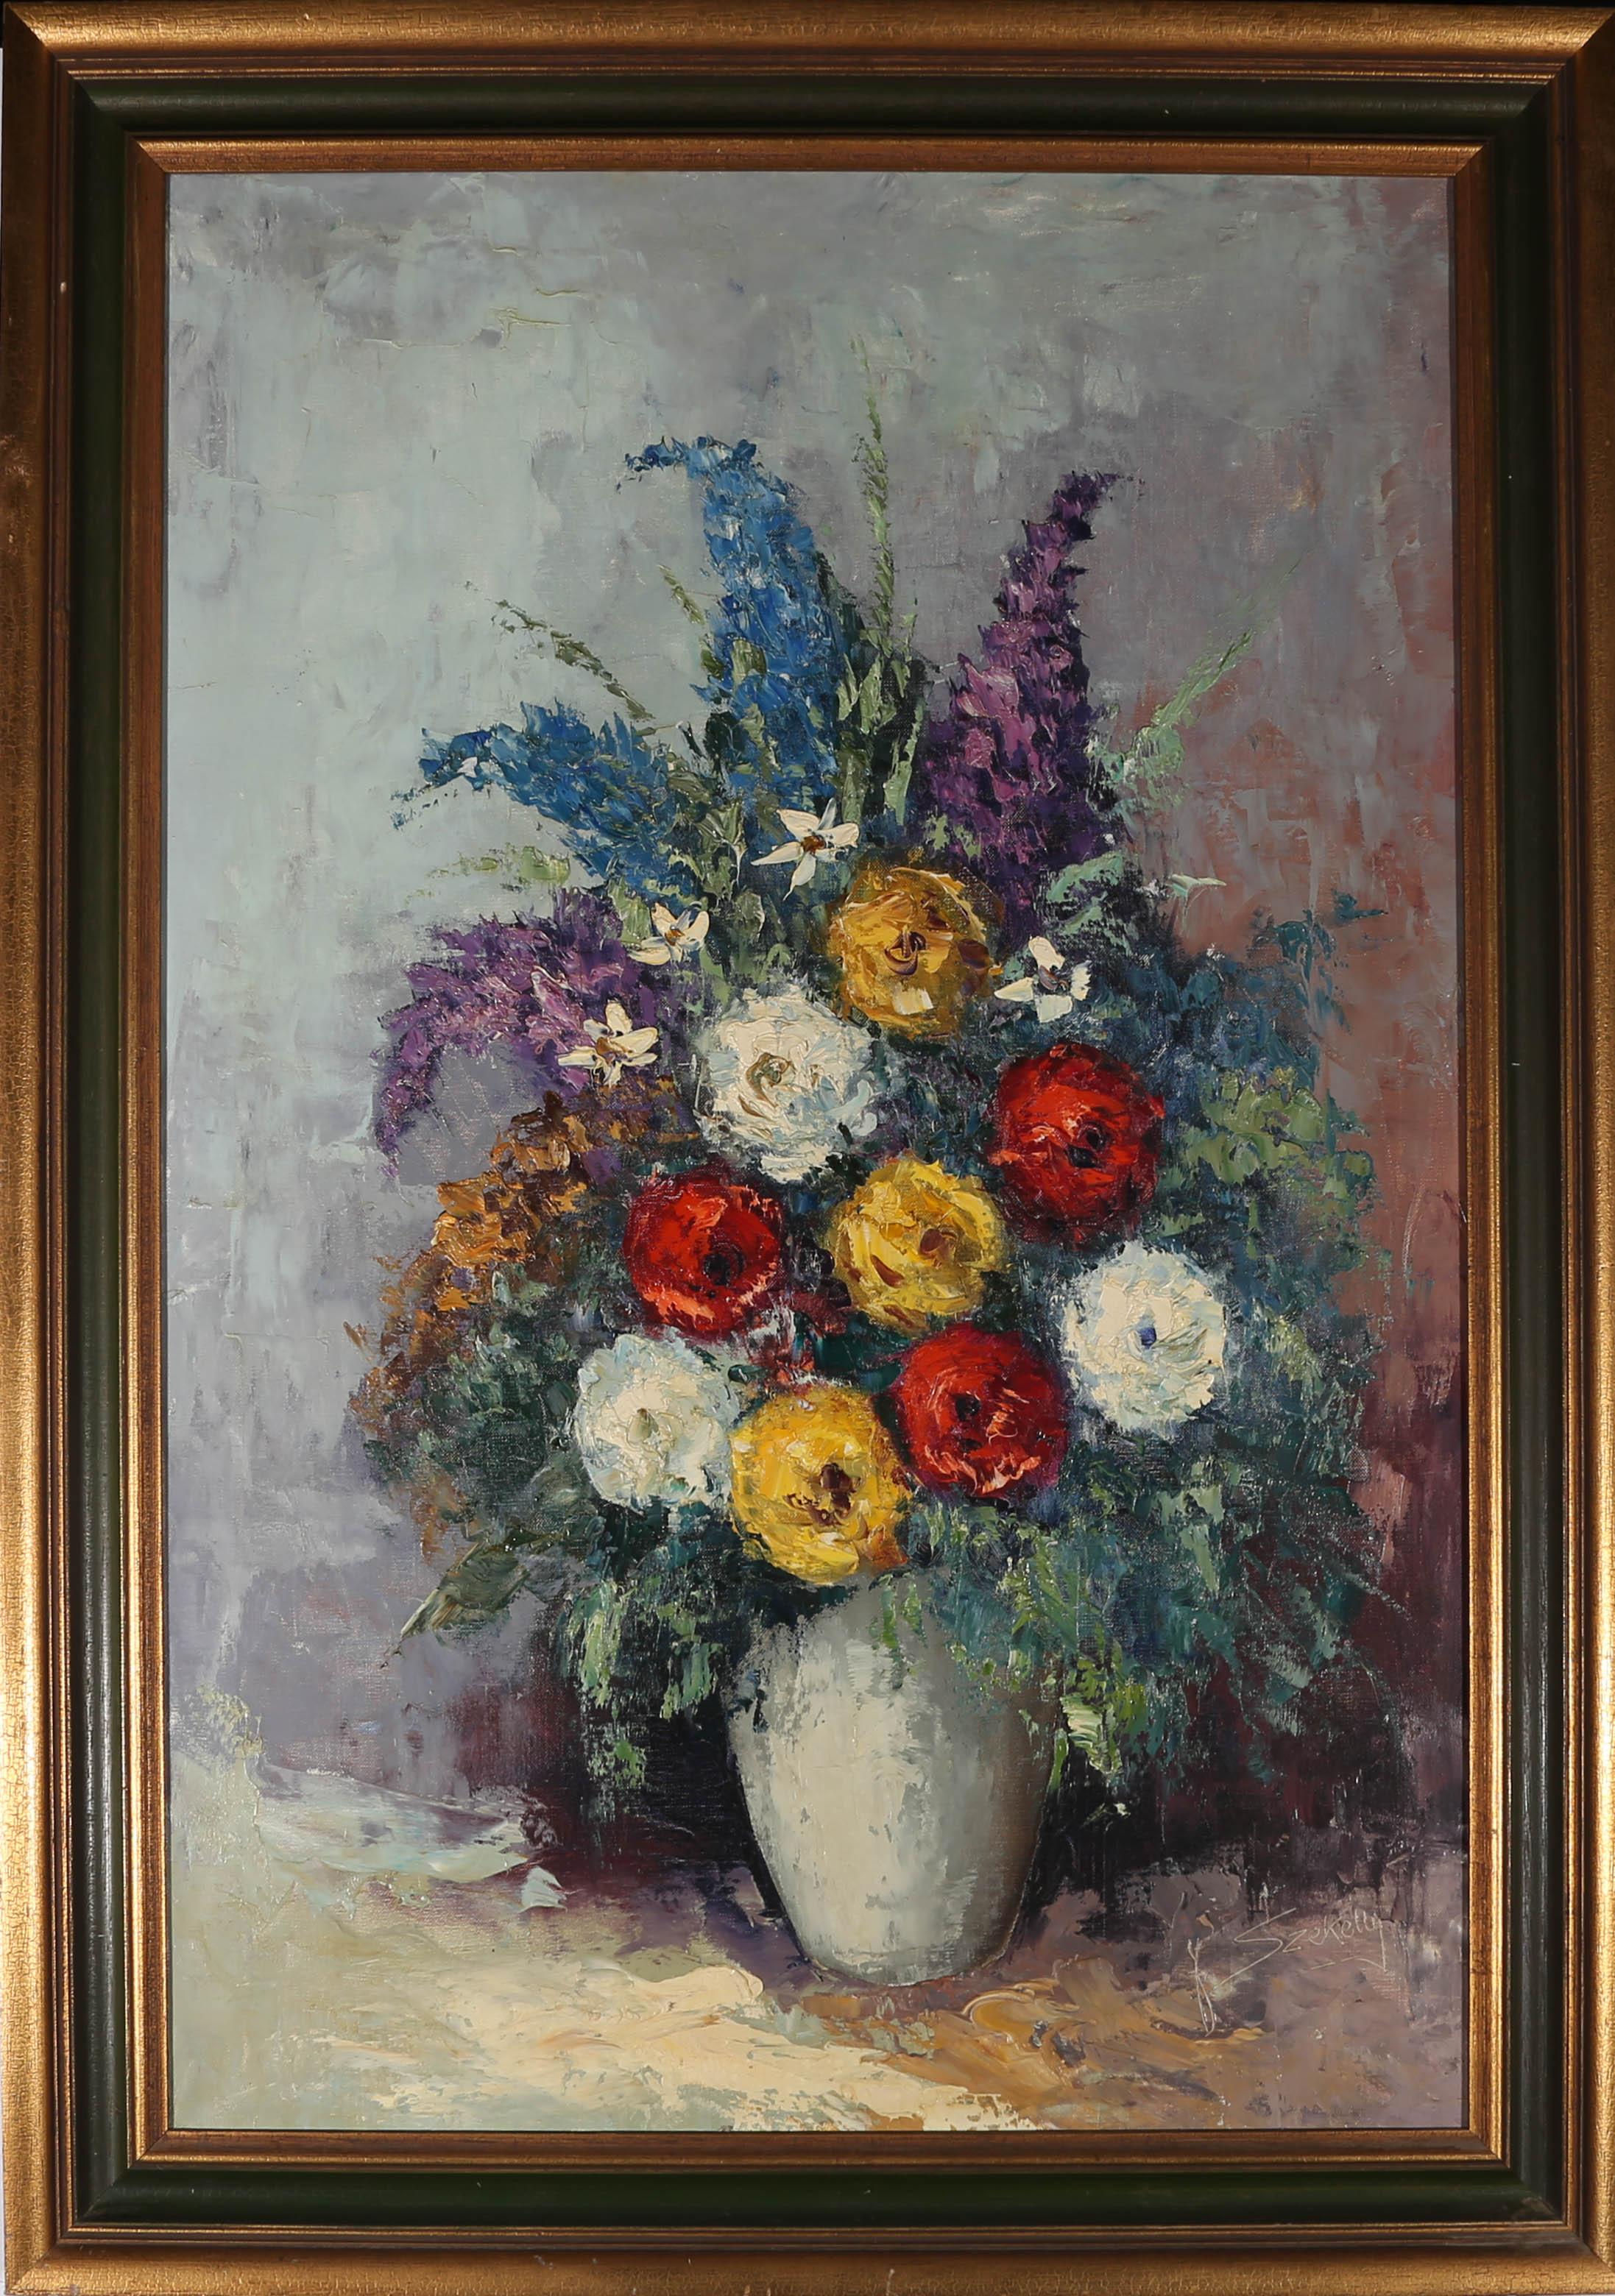 A vibrant oil depiction of roses and hyacinths in a ceramic vase. The artist has captured the flowers in an expressive style with an impasto technique. Signed to the lower right. Presented in a part gilt frame with a green painted cove. On canvas on